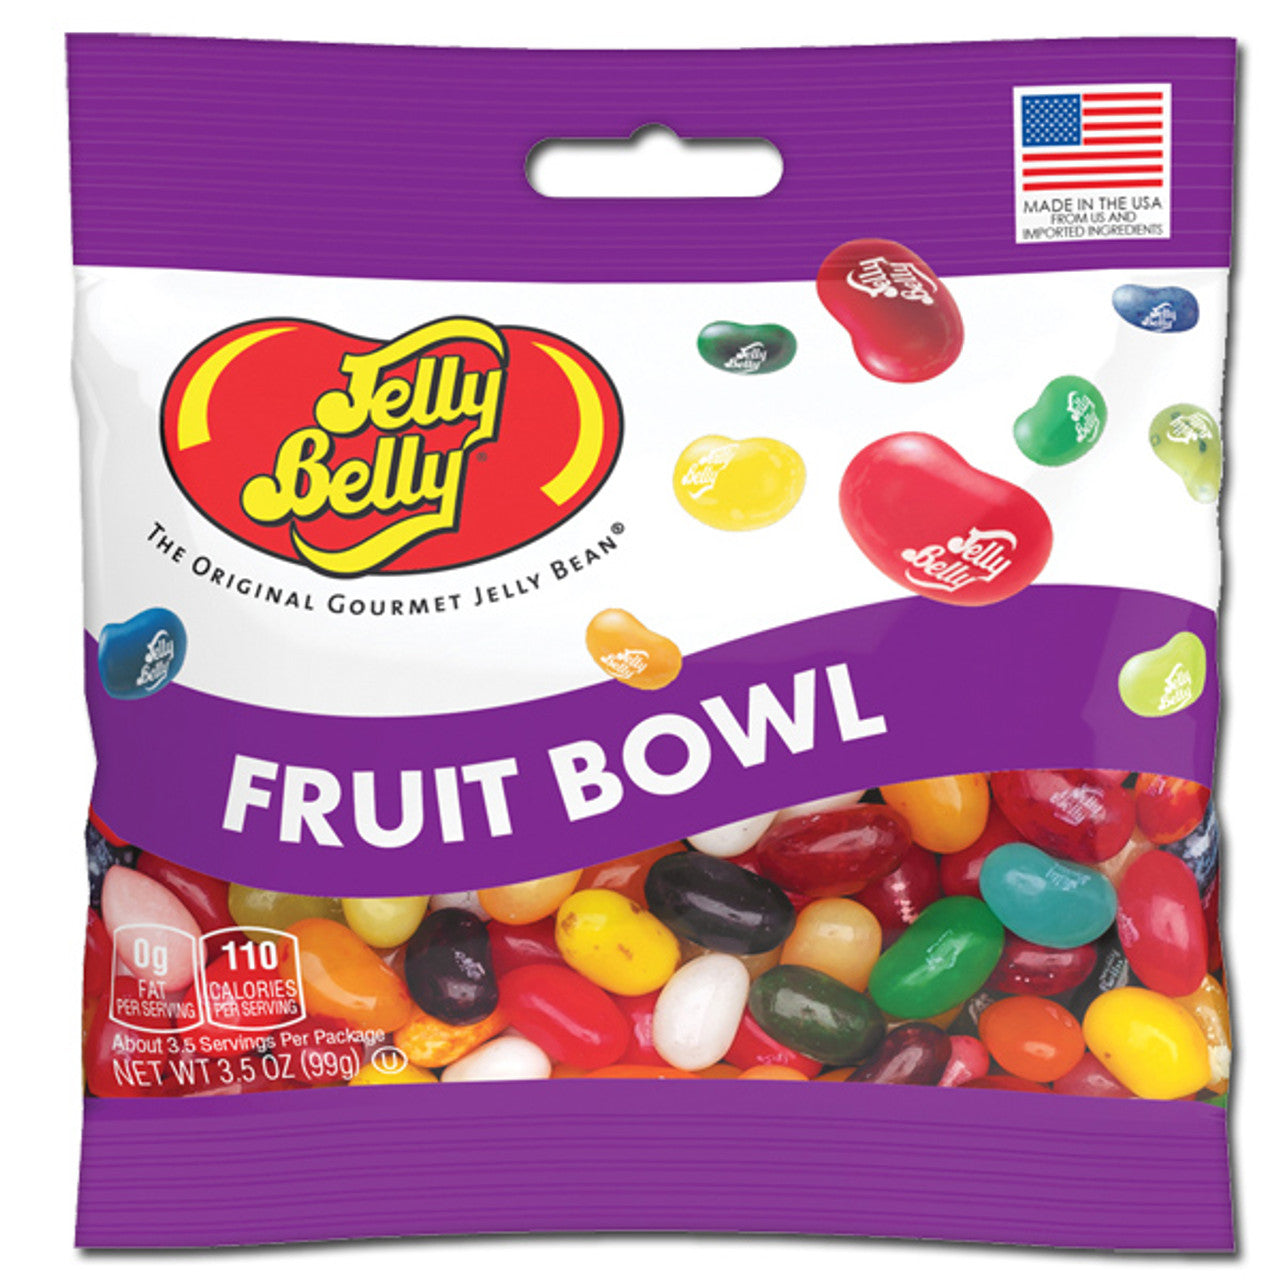 Jelly Belly Fruit Bowl Jelly Beans 3.5oz